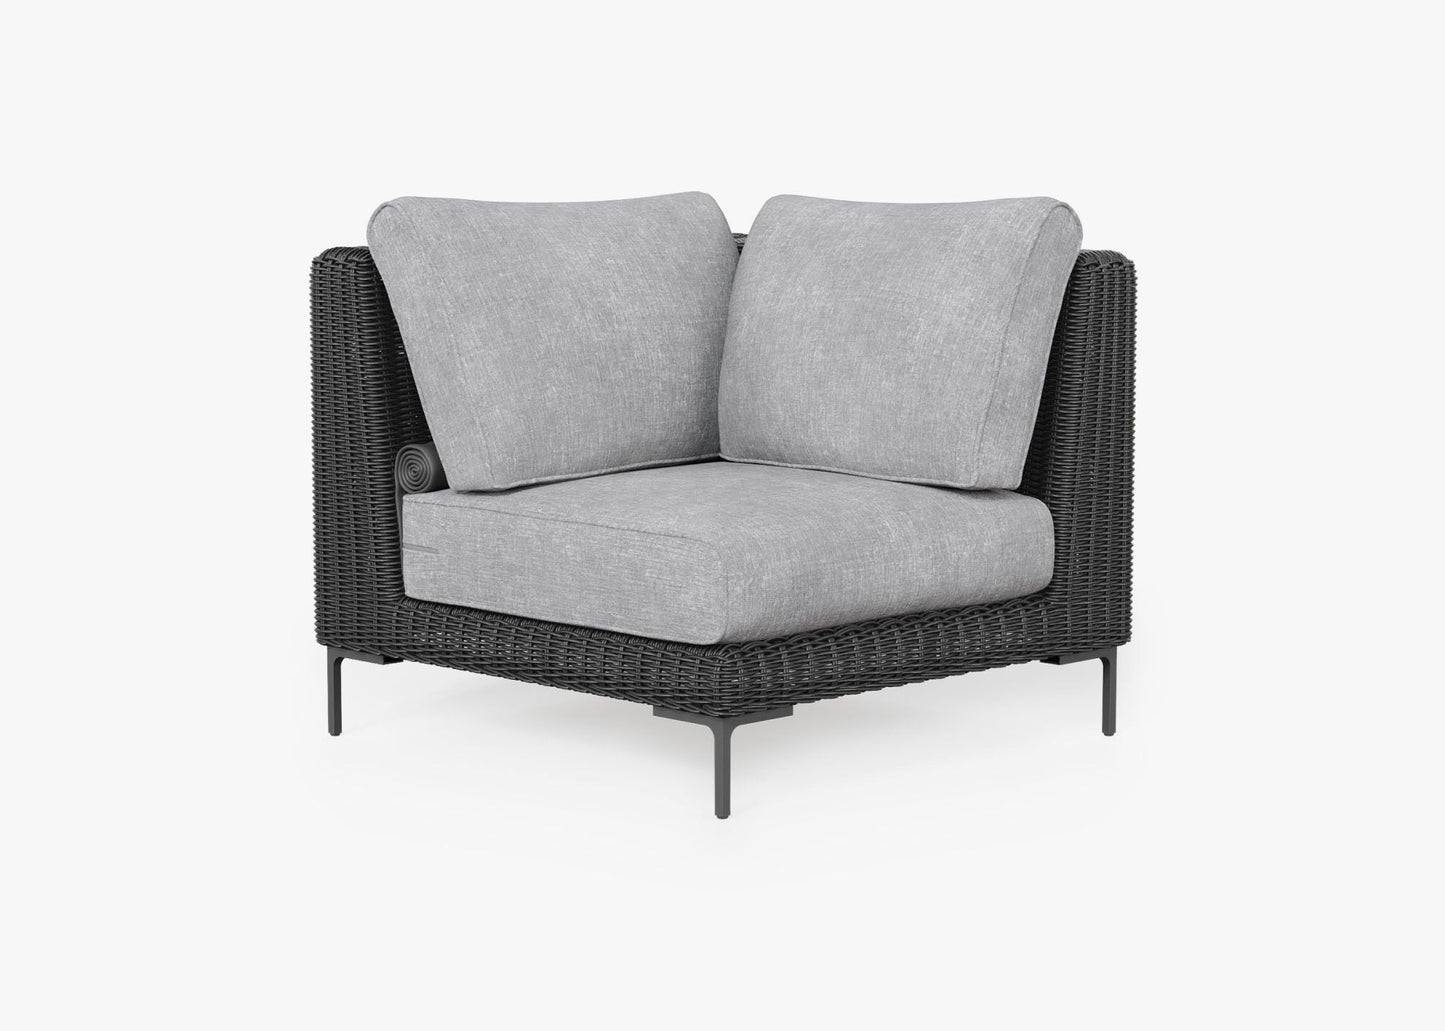 Live Outer 37" Black Wicker Outdoor Sectional Chair With Pacific Fog Gray Cushion